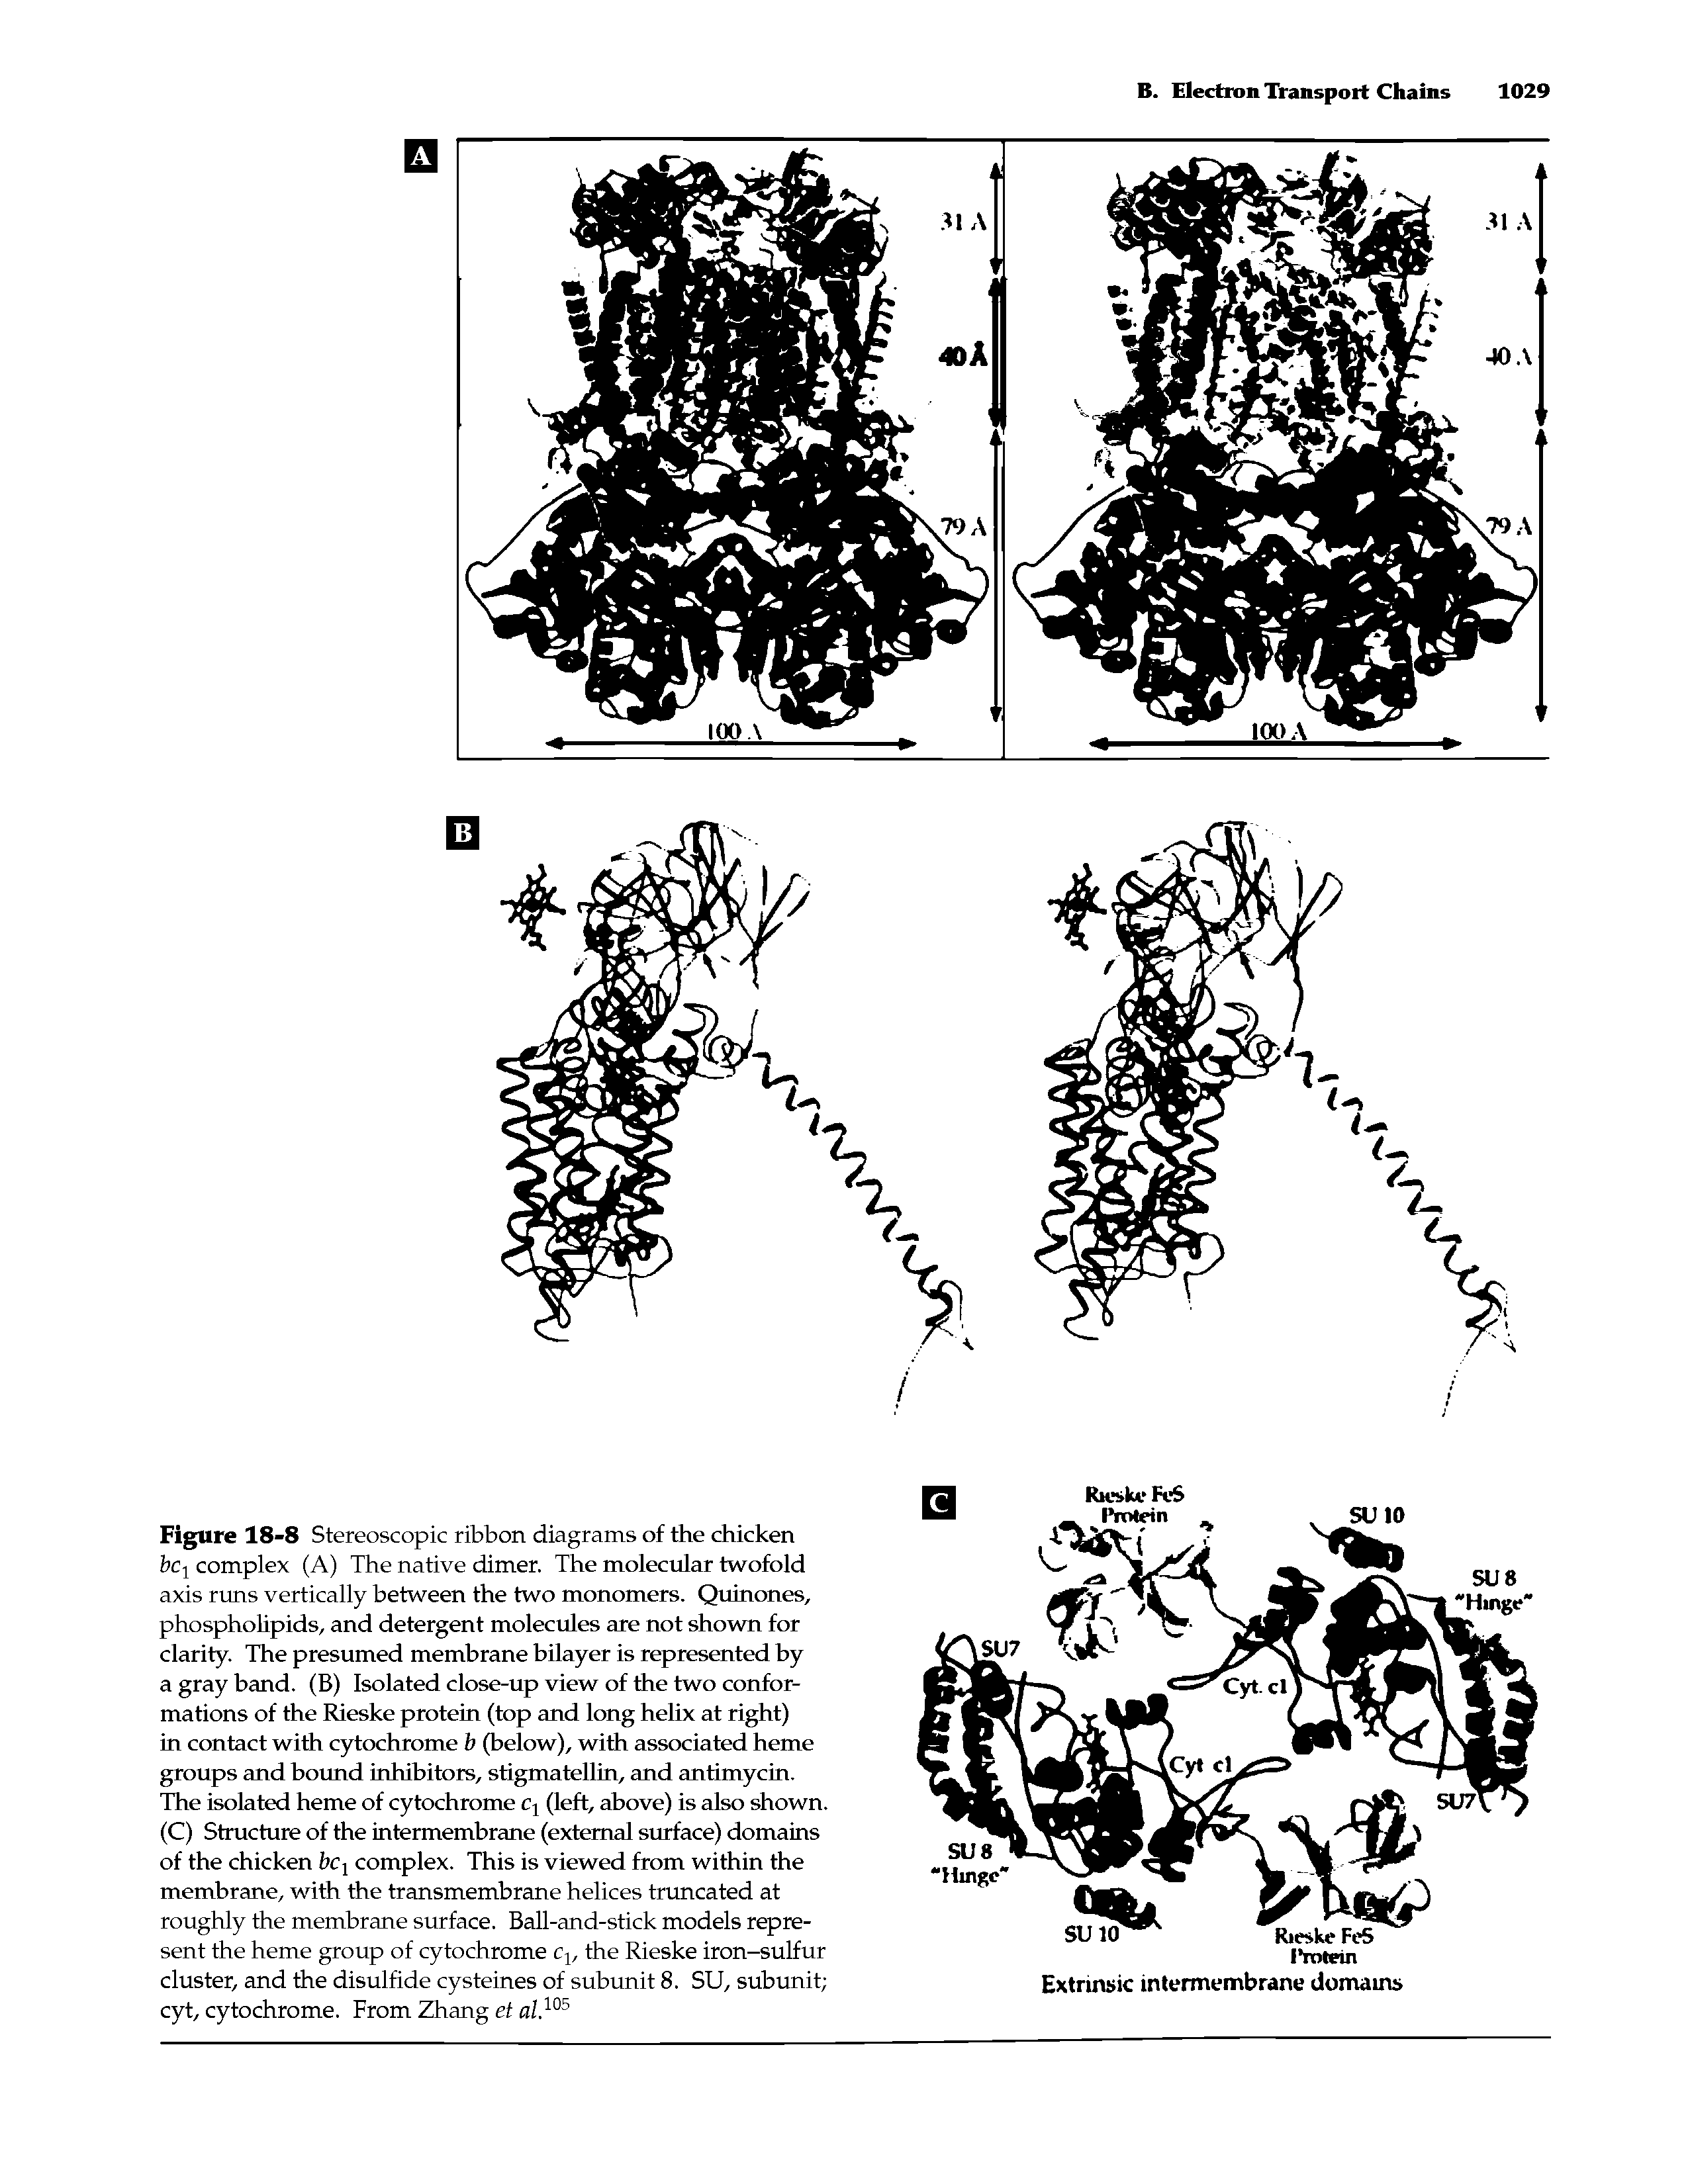 Figure 18-8 Stereoscopic ribbon diagrams of the chicken bc1 complex (A) The native dimer. The molecular twofold axis runs vertically between the two monomers. Quinones, phospholipids, and detergent molecules are not shown for clarity. The presumed membrane bilayer is represented by a gray band. (B) Isolated close-up view of the two conformations of the Rieske protein (top and long helix at right) in contact with cytochrome b (below), with associated heme groups and bound inhibitors, stigmatellin, and antimycin. The isolated heme of cytochrome c, (left, above) is also shown. (C) Structure of the intermembrane (external surface) domains of the chicken bcx complex. This is viewed from within the membrane, with the transmembrane helices truncated at roughly the membrane surface. Ball-and-stick models represent the heme group of cytochrome cy the Rieske iron-sulfur cluster, and the disulfide cysteines of subunit 8. SU, subunit cyt, cytochrome. From Zhang et al.105...